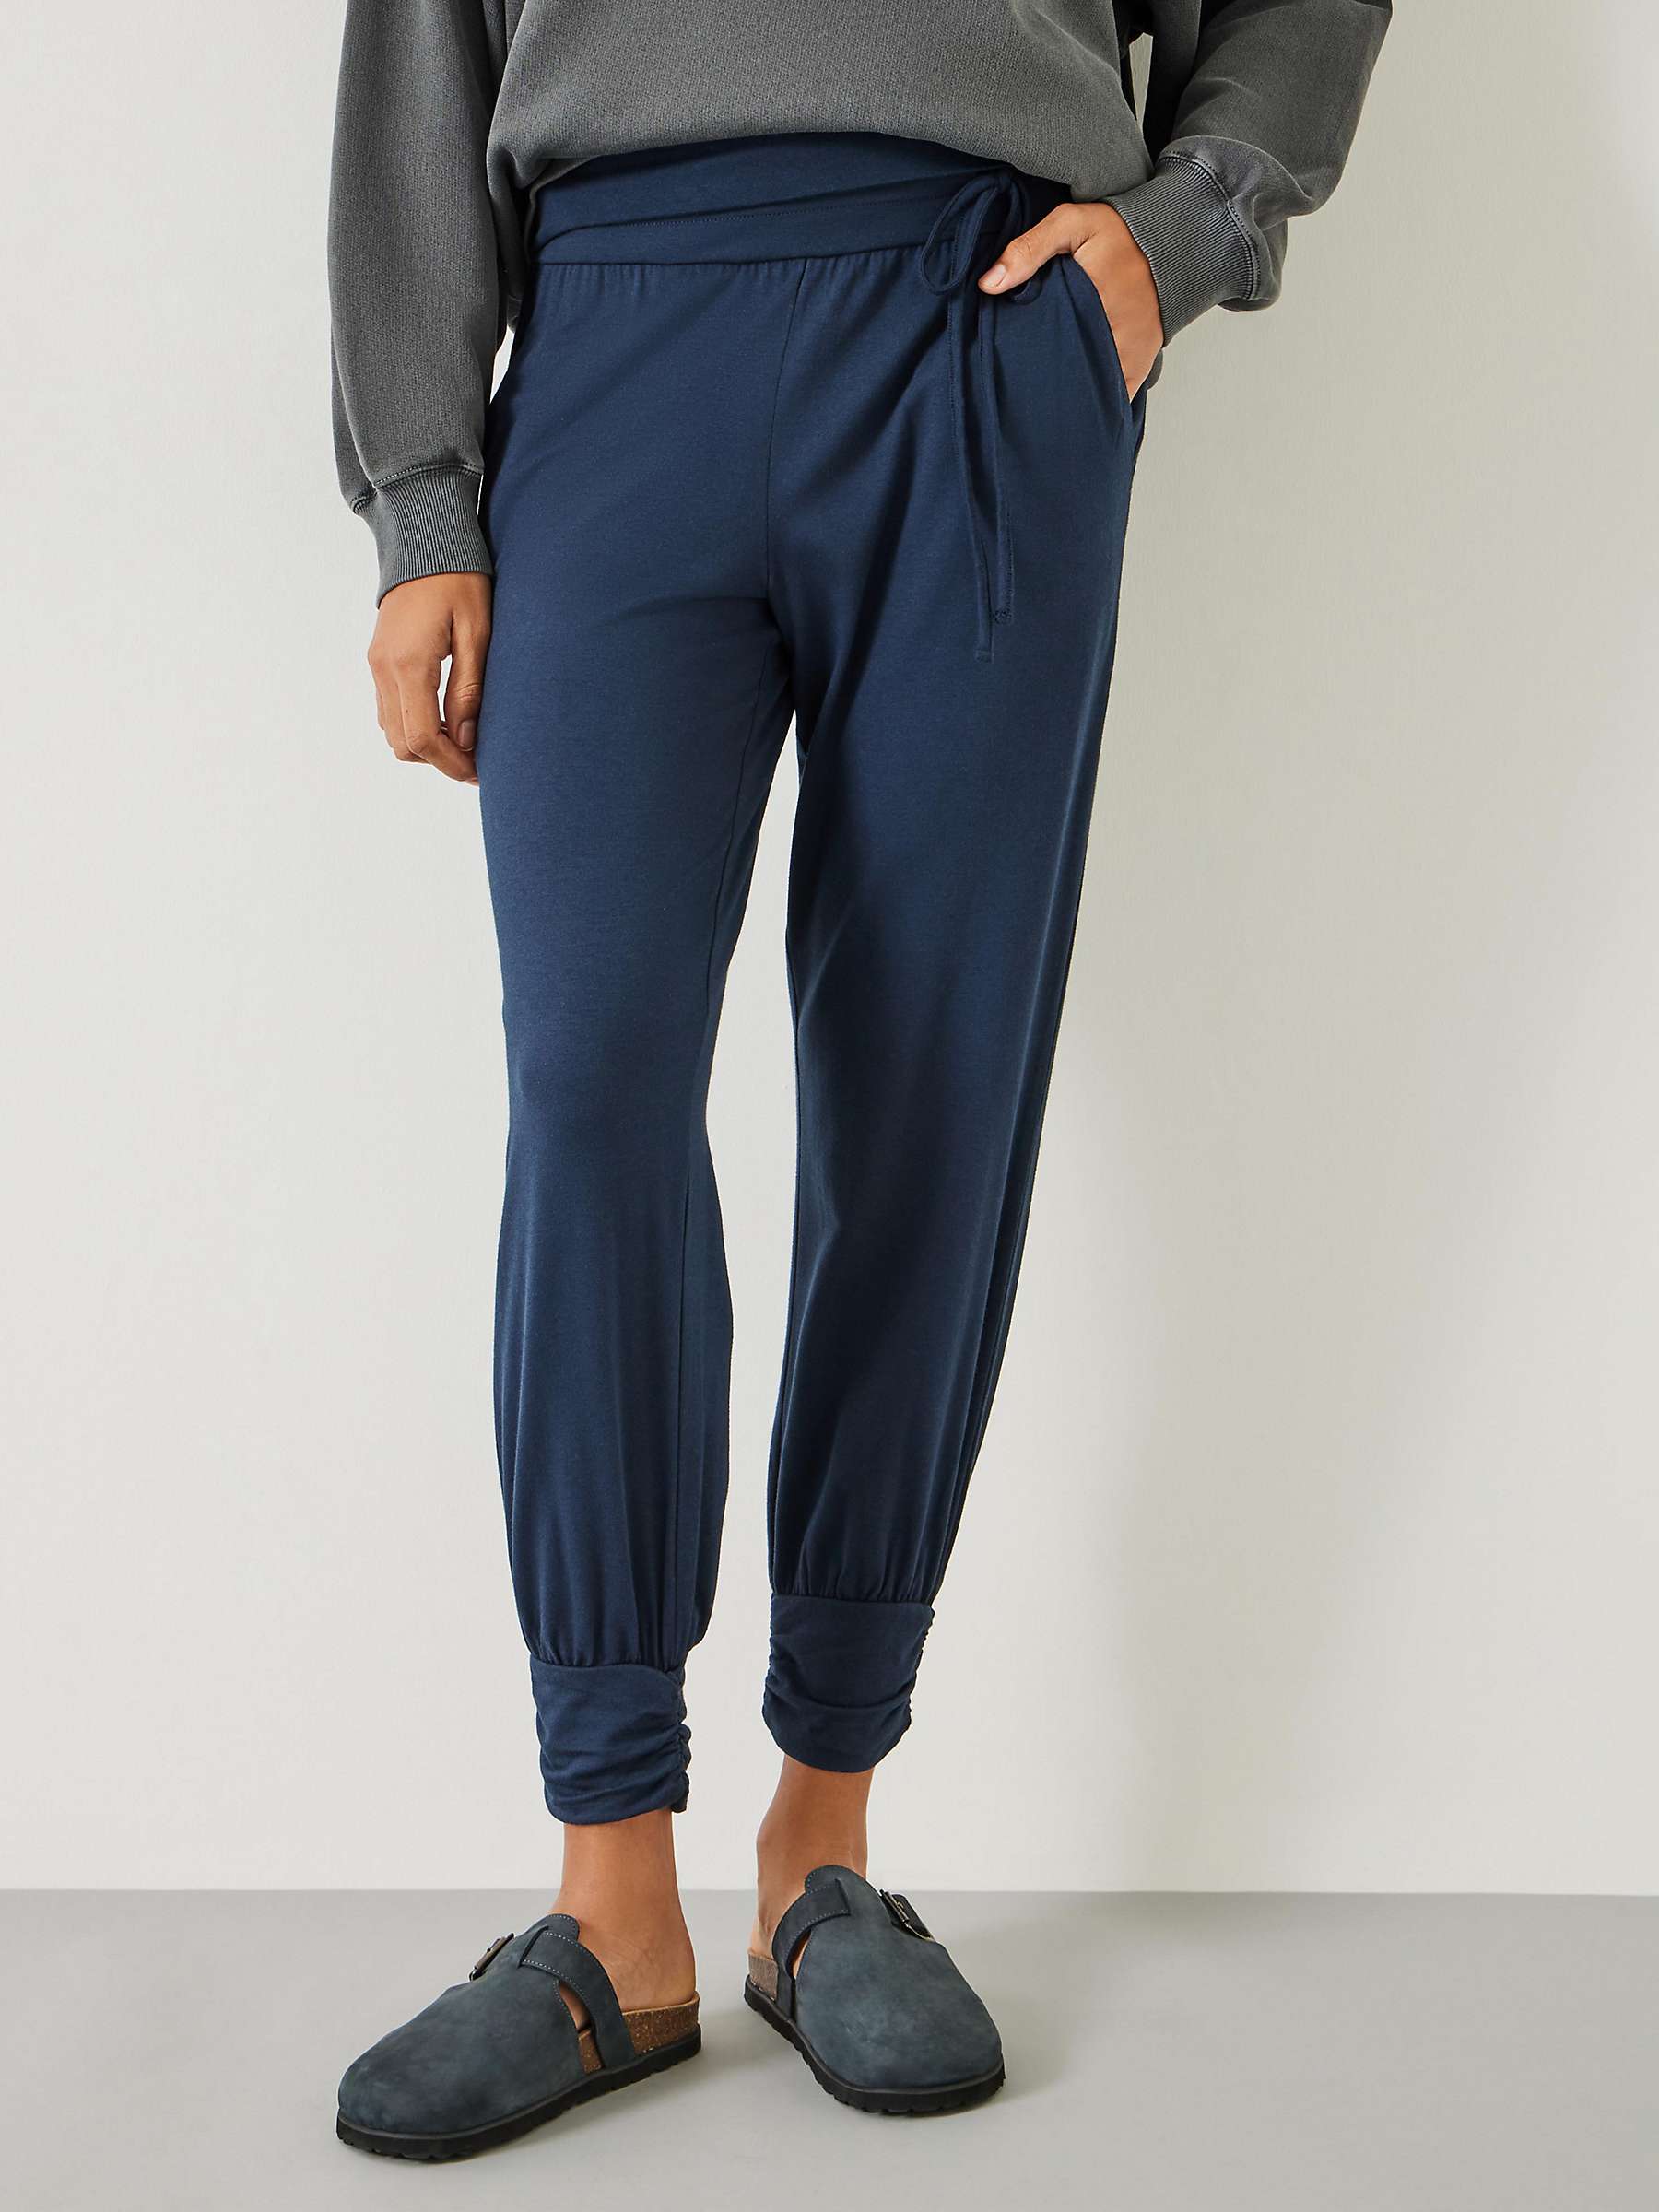 Buy HUSH Amie Joggers Online at johnlewis.com